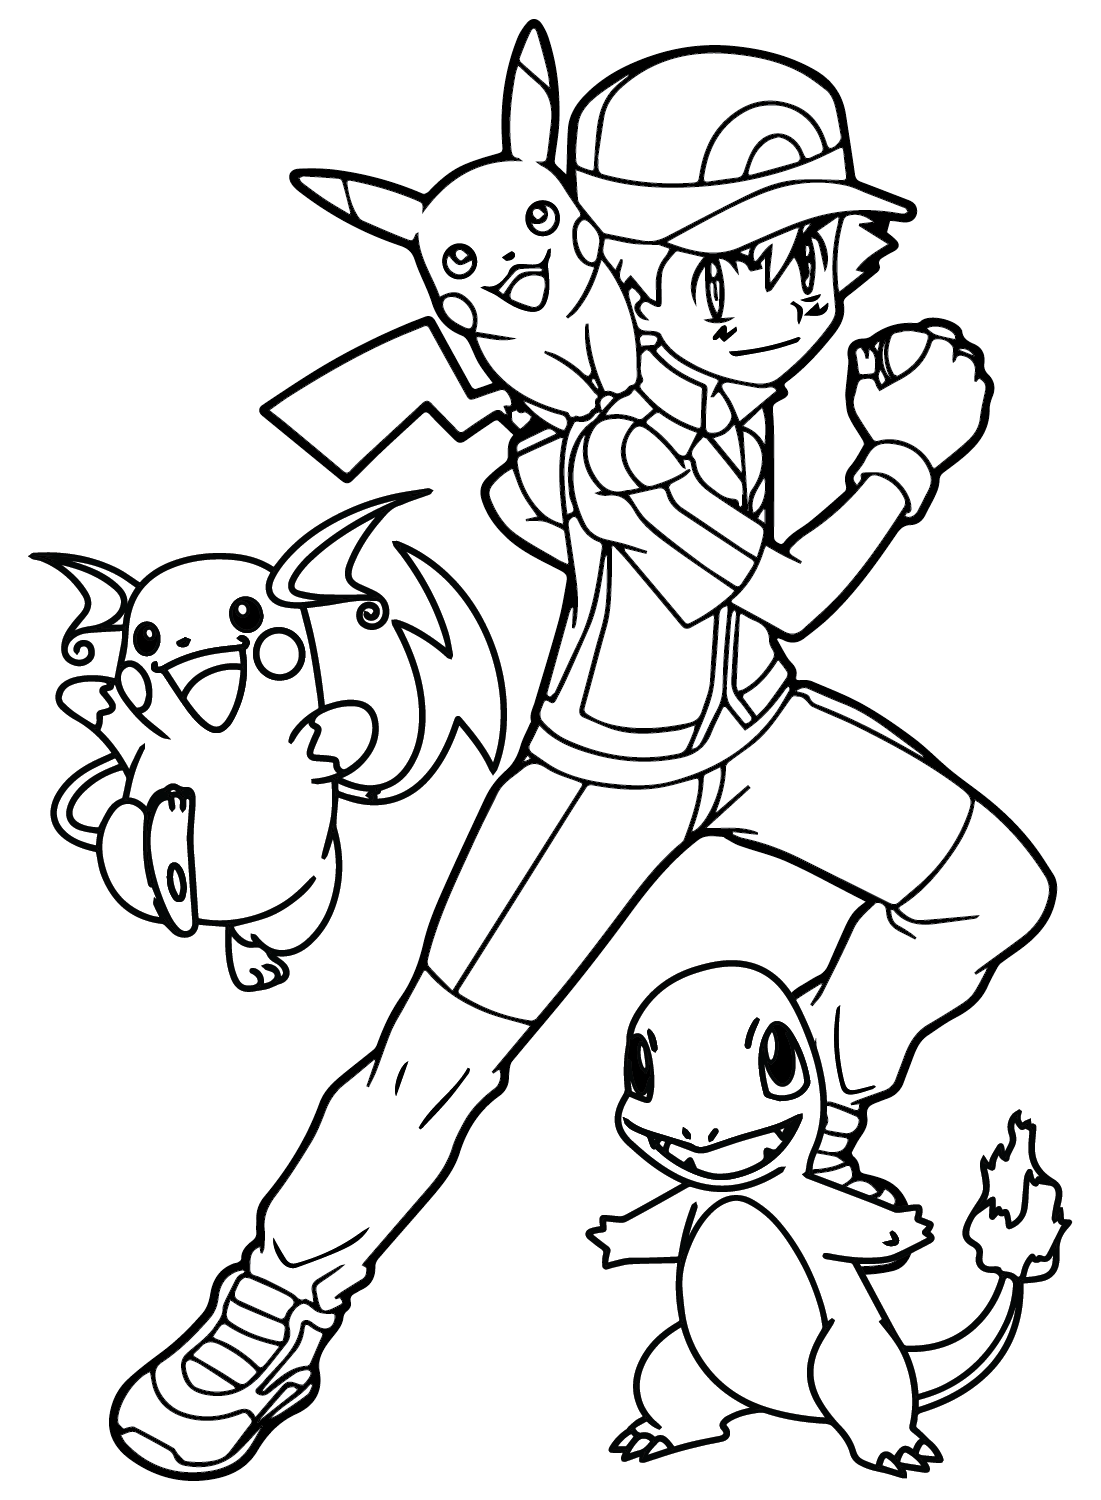 Ash Ketchum Pictures to Color from Ash Ketchum